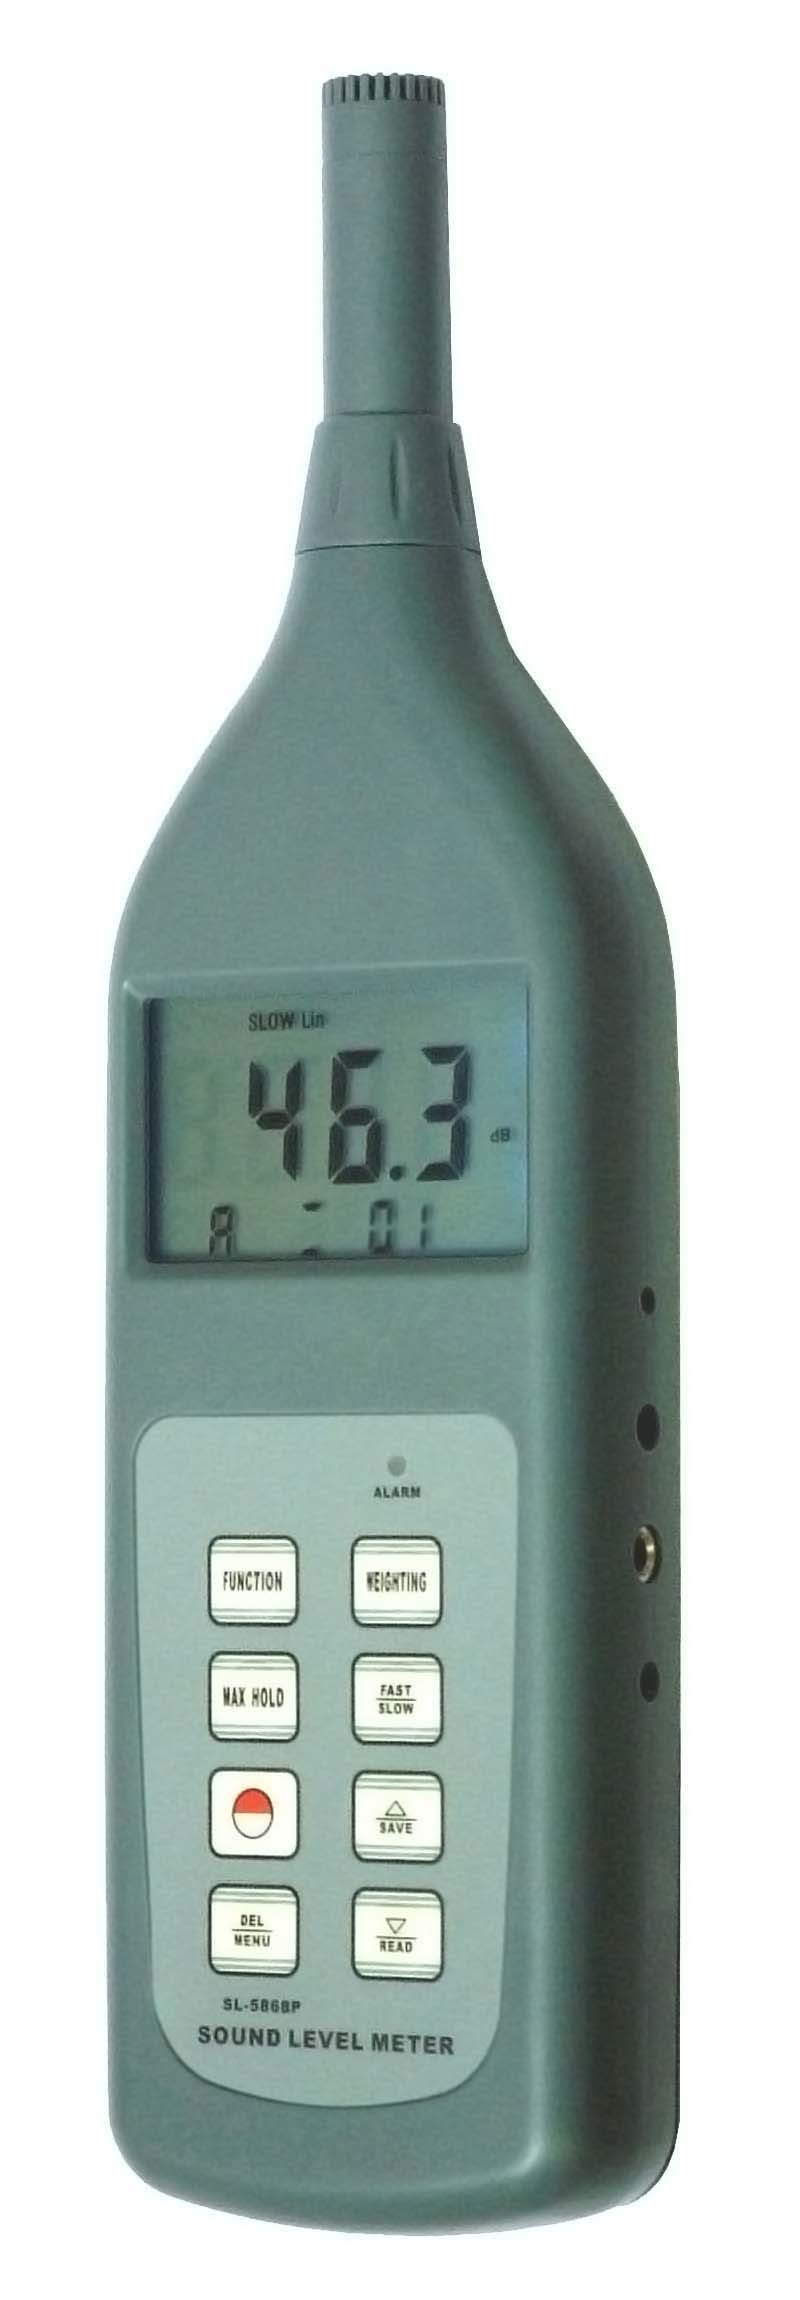 Buy cheap Sound Level Meter SL-5868P from wholesalers